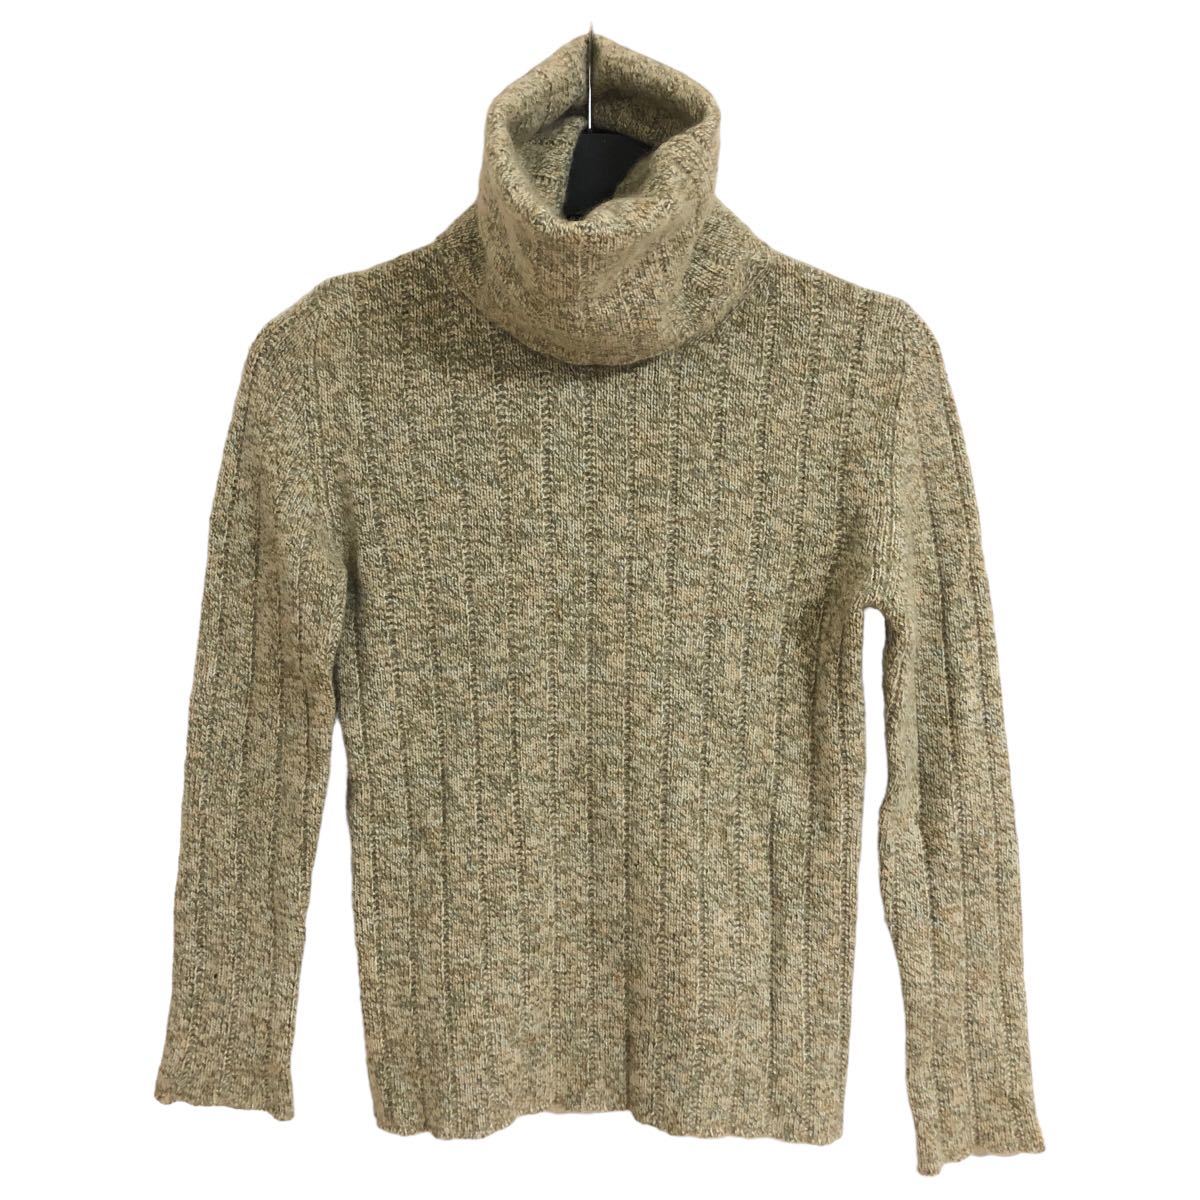 CHANEL Chanel high‐necked sweater cashmere 100% P09130V0036 #38 green series 